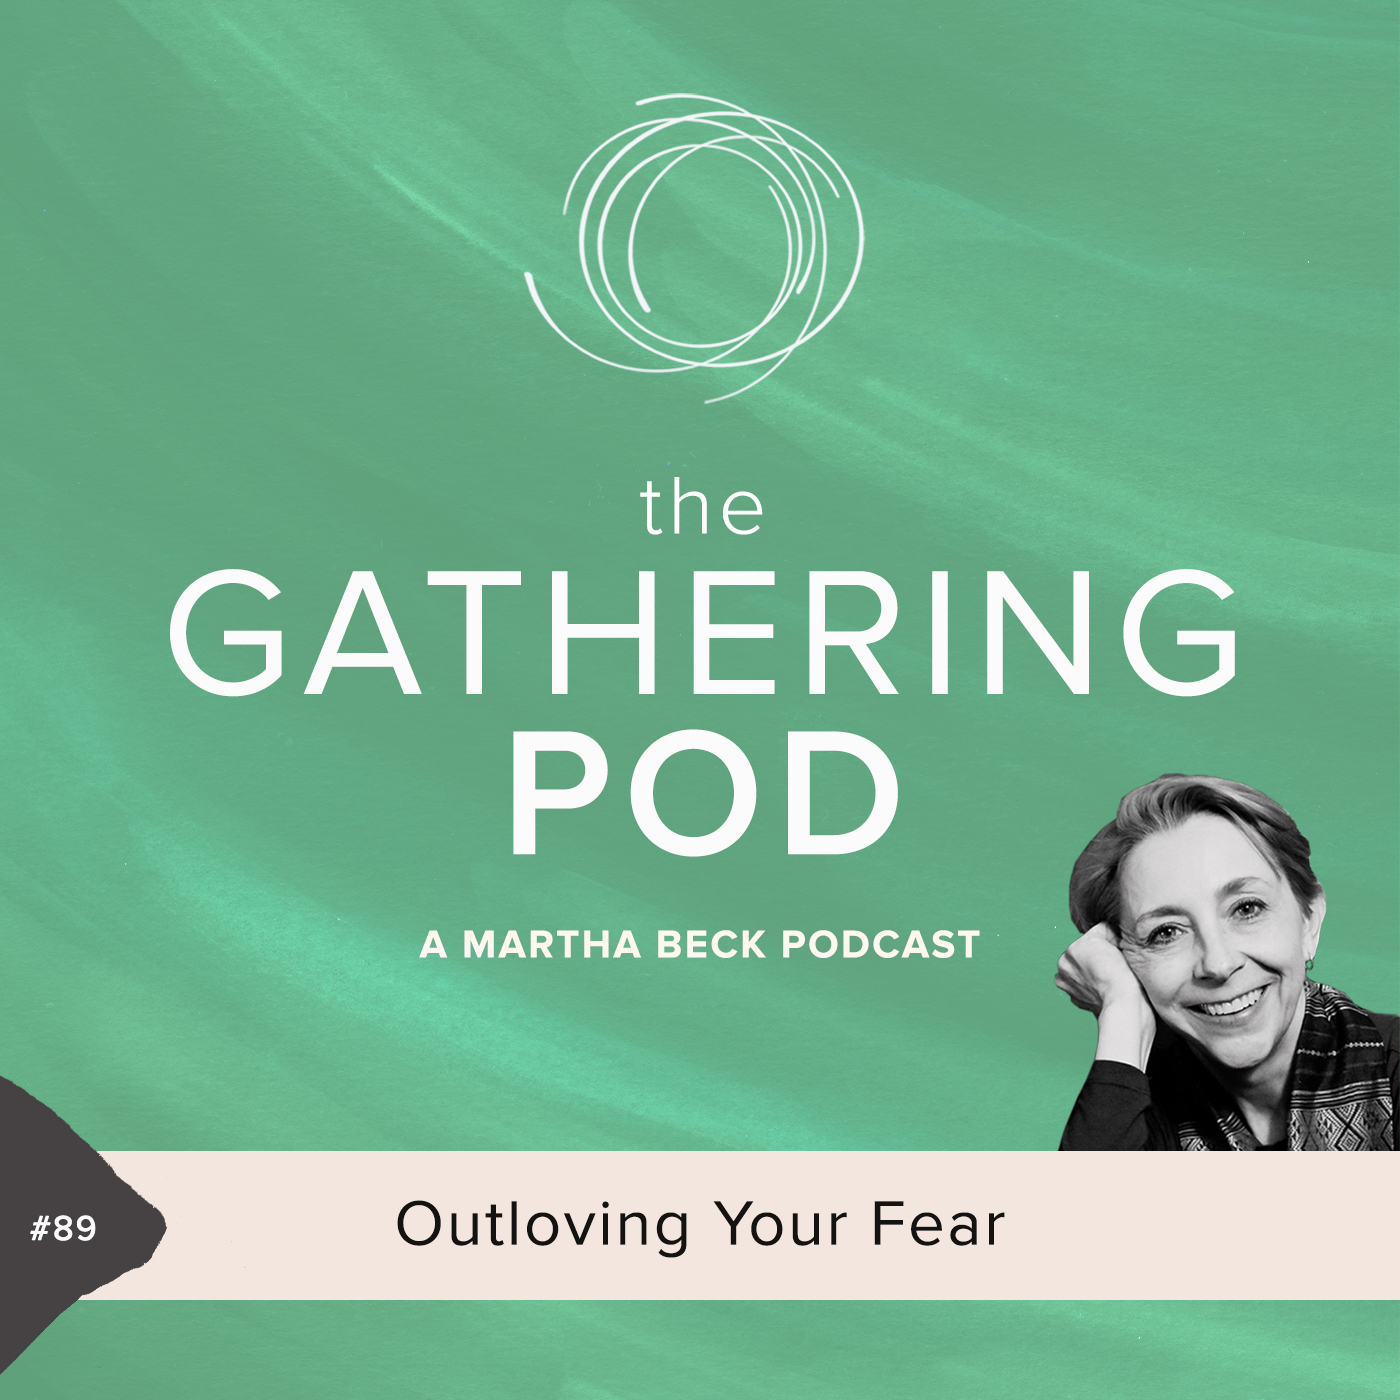 Image for The Gathering Pod A Martha Beck Podcast Episode #89 Outloving Your Fear